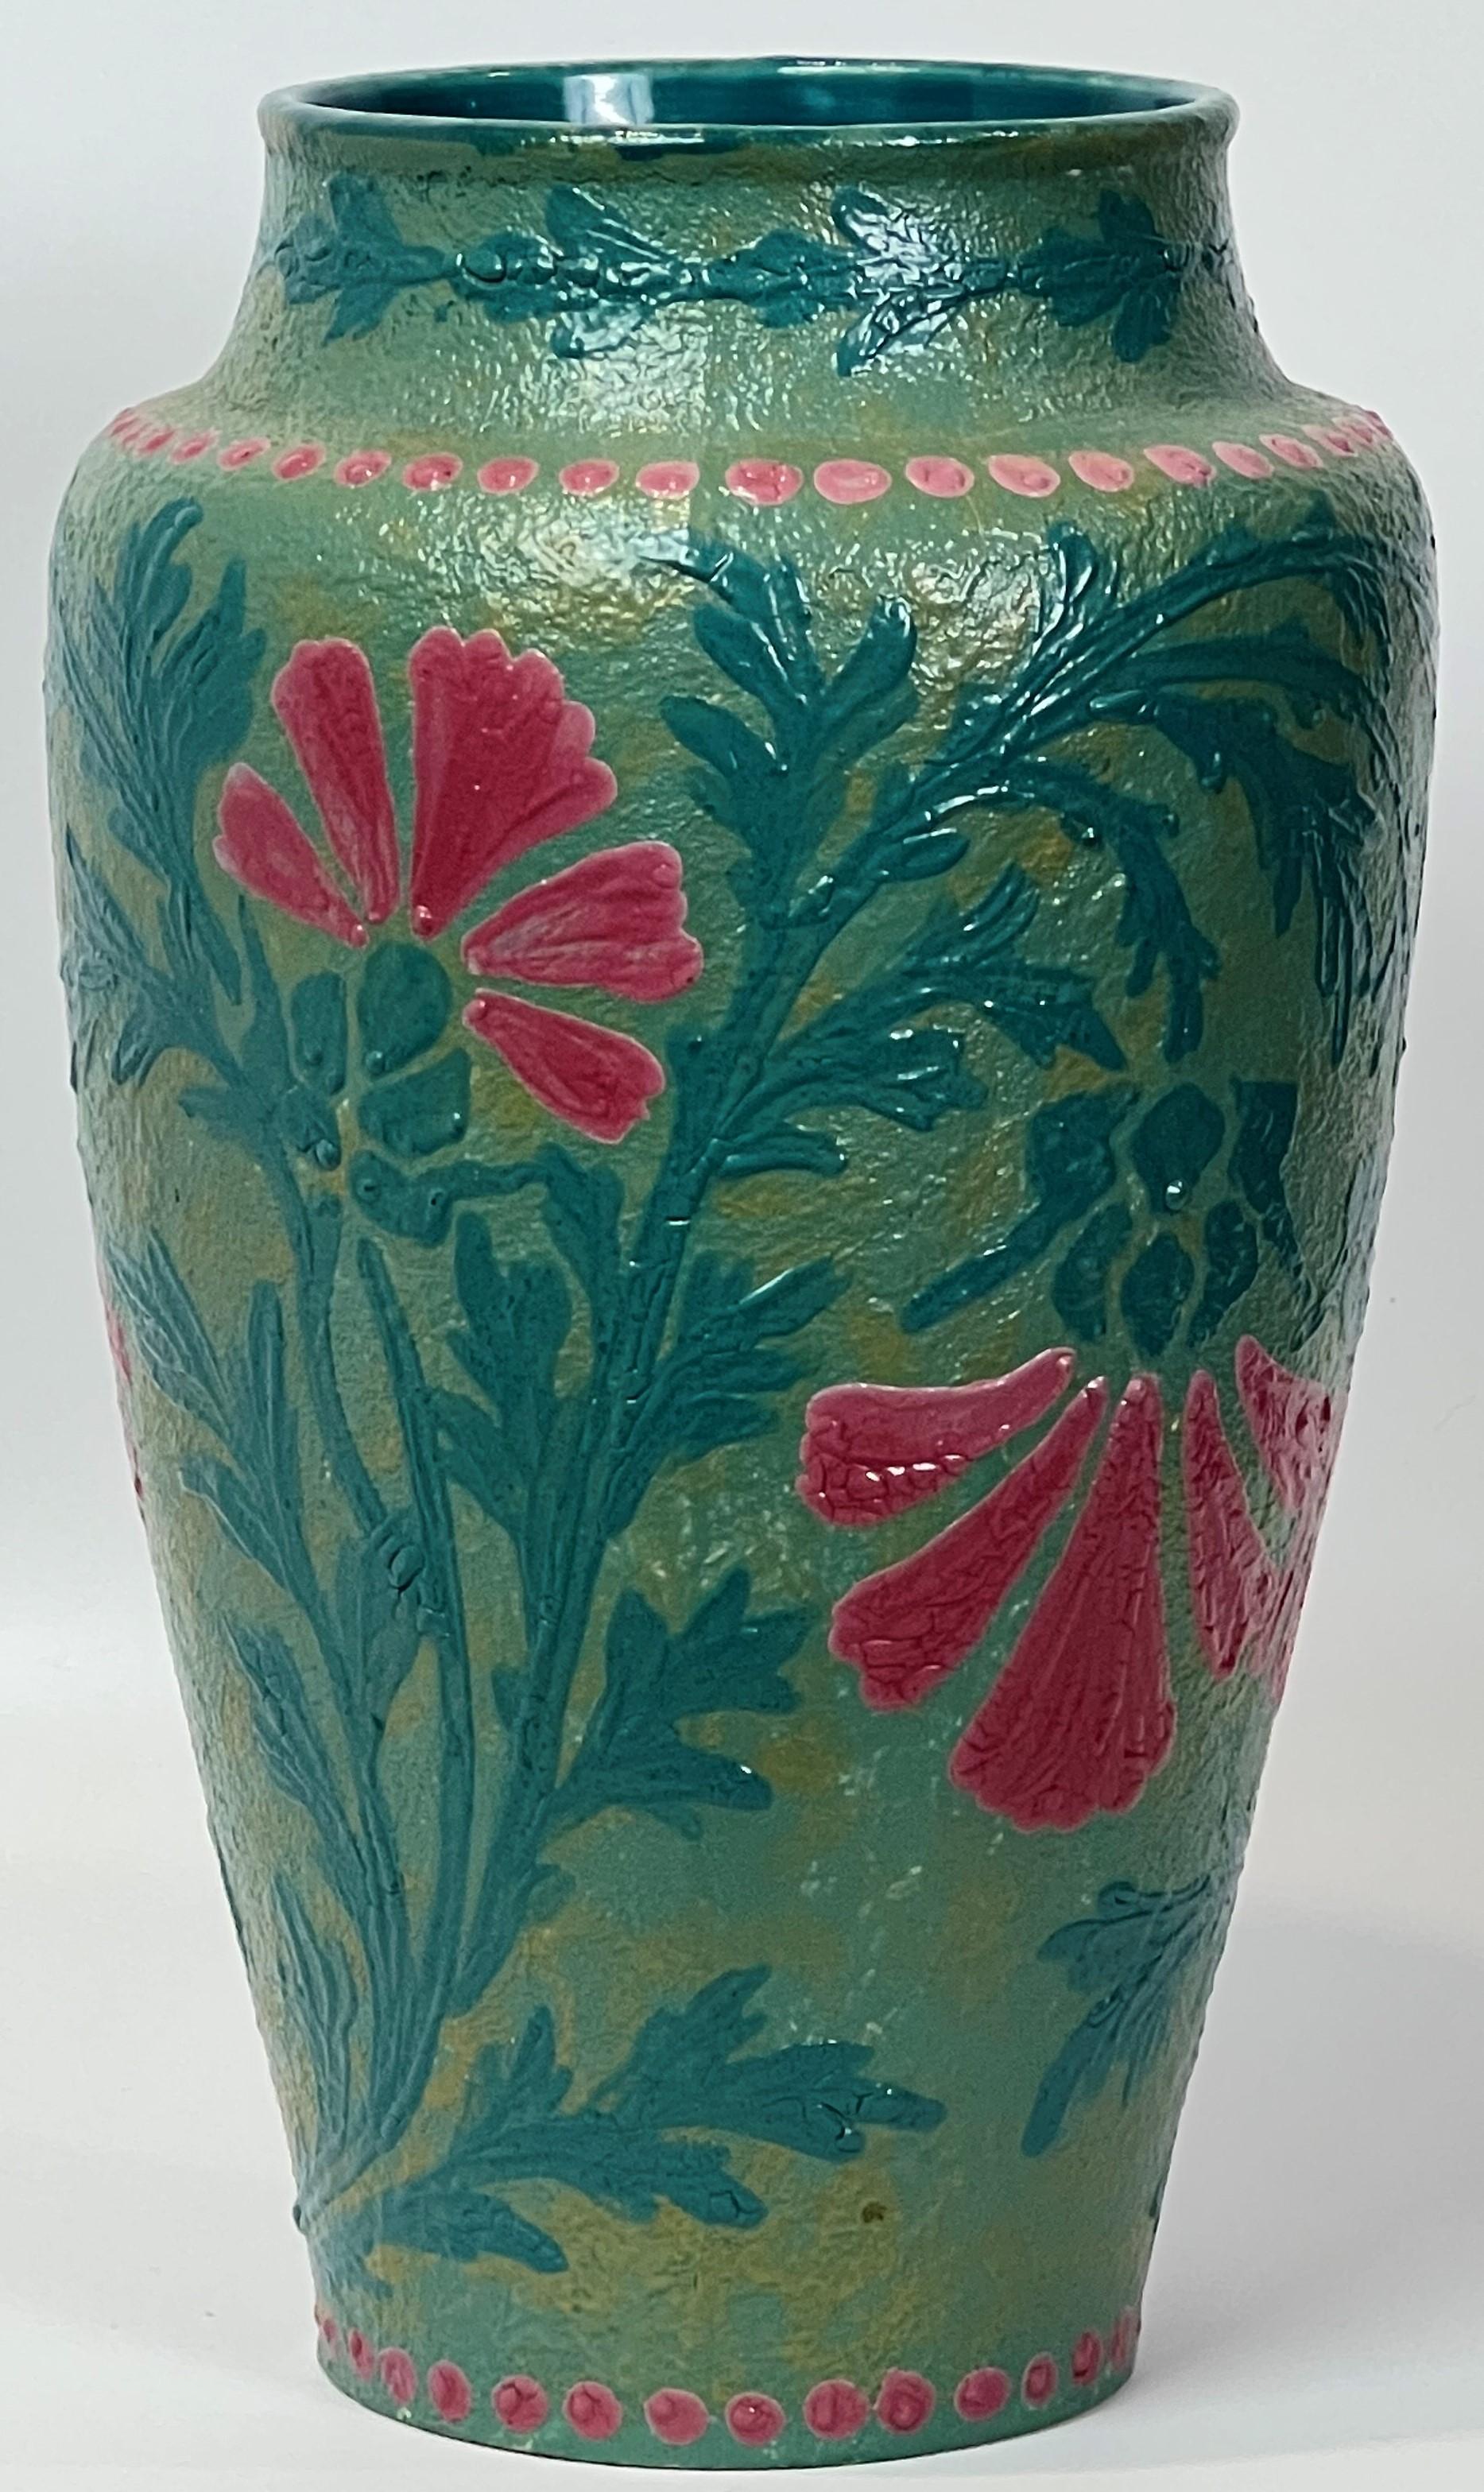 In 1908 Joseph Ekberg became the lead artist and decorator at Gustavsberg in Sweden. This vase is likely one of the examples he executed in preparation for an exhibition in Germany in 1909. The painted conventionalized flowers are in the Jugendstil